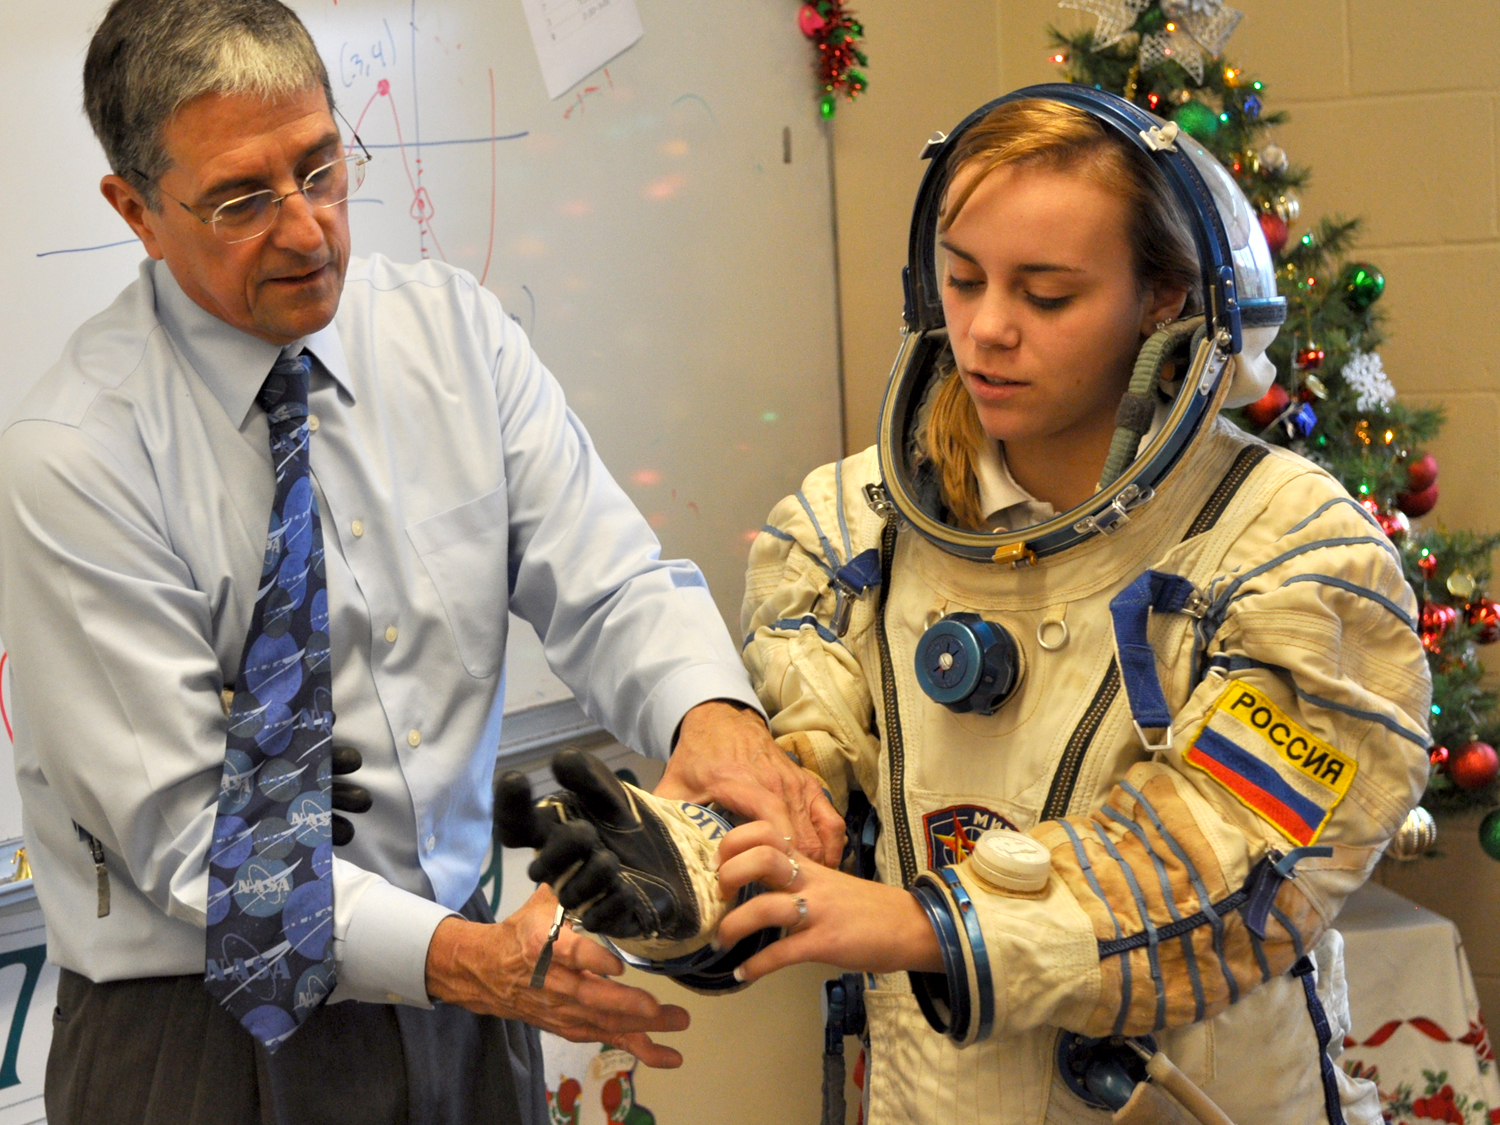  Learning how spacesuits protect astronauts. 